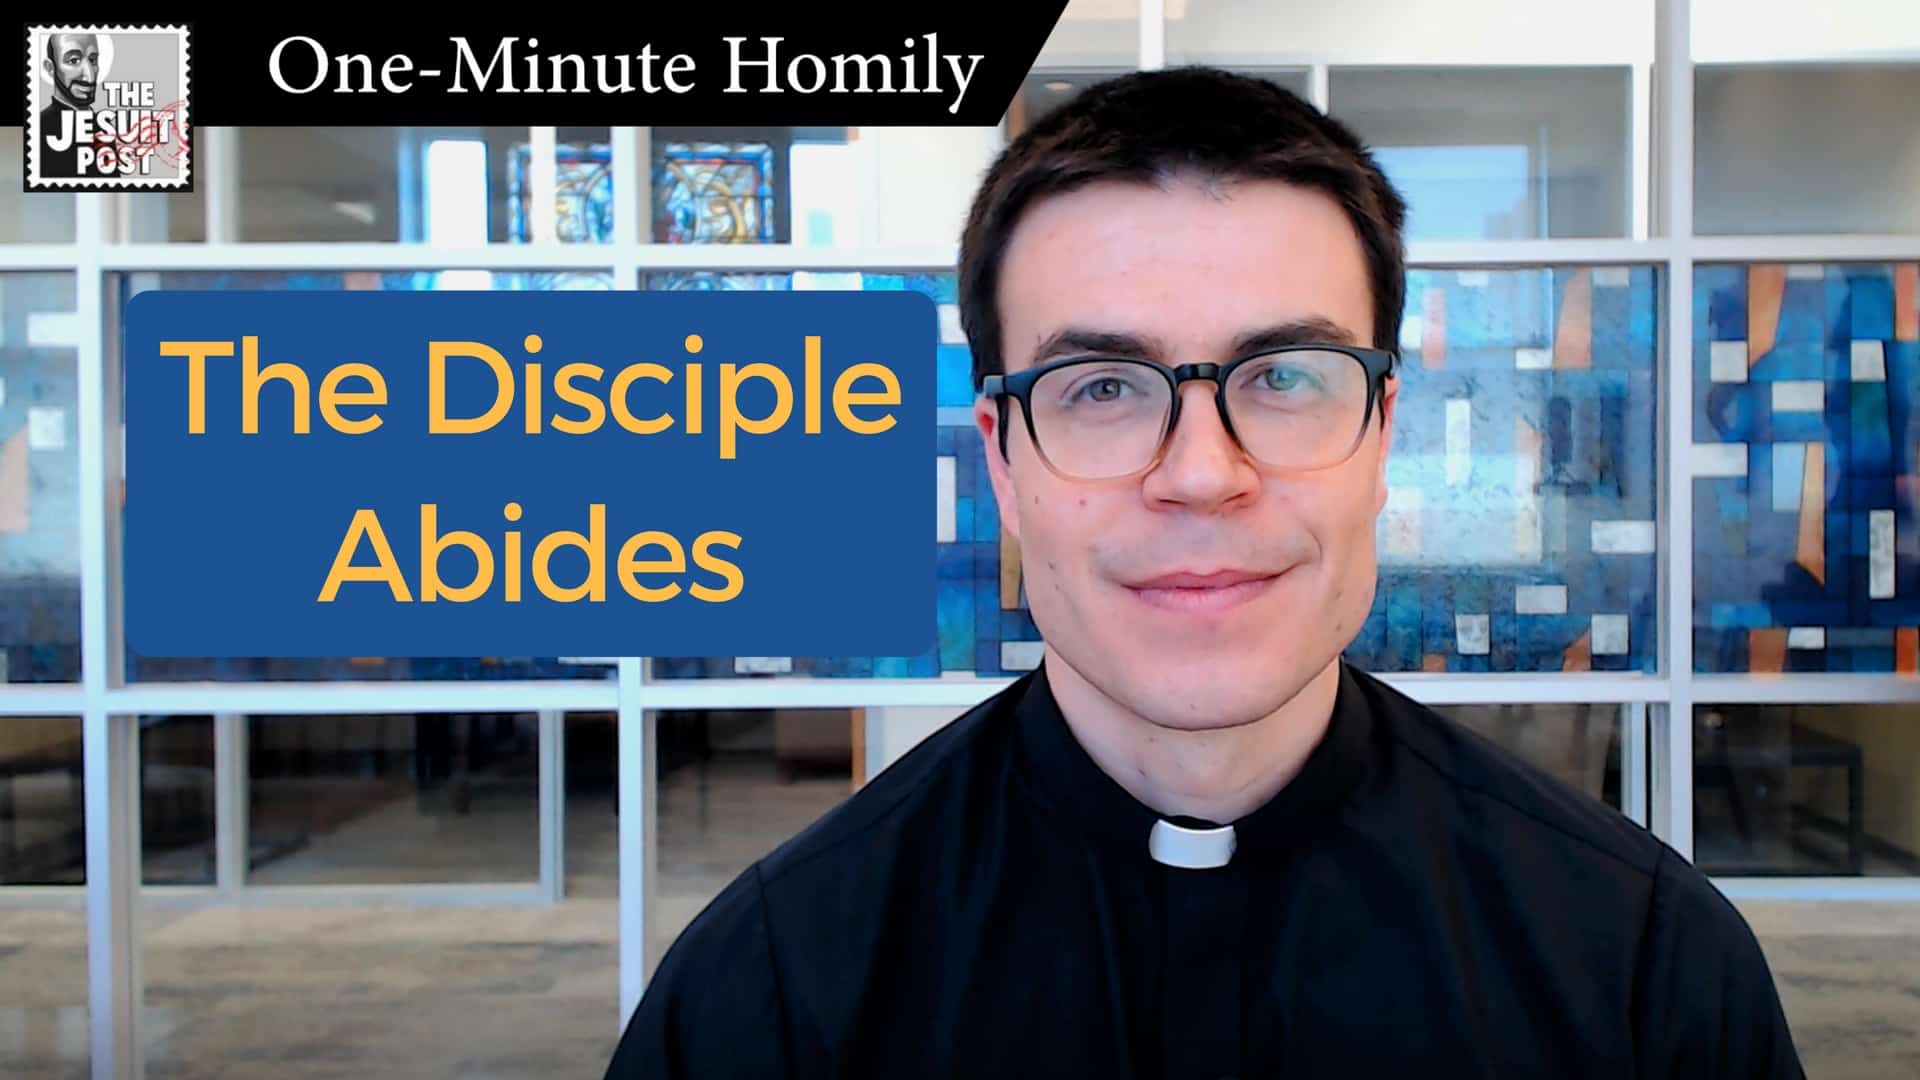 One-Minute Homily: “The Disciple Abides”